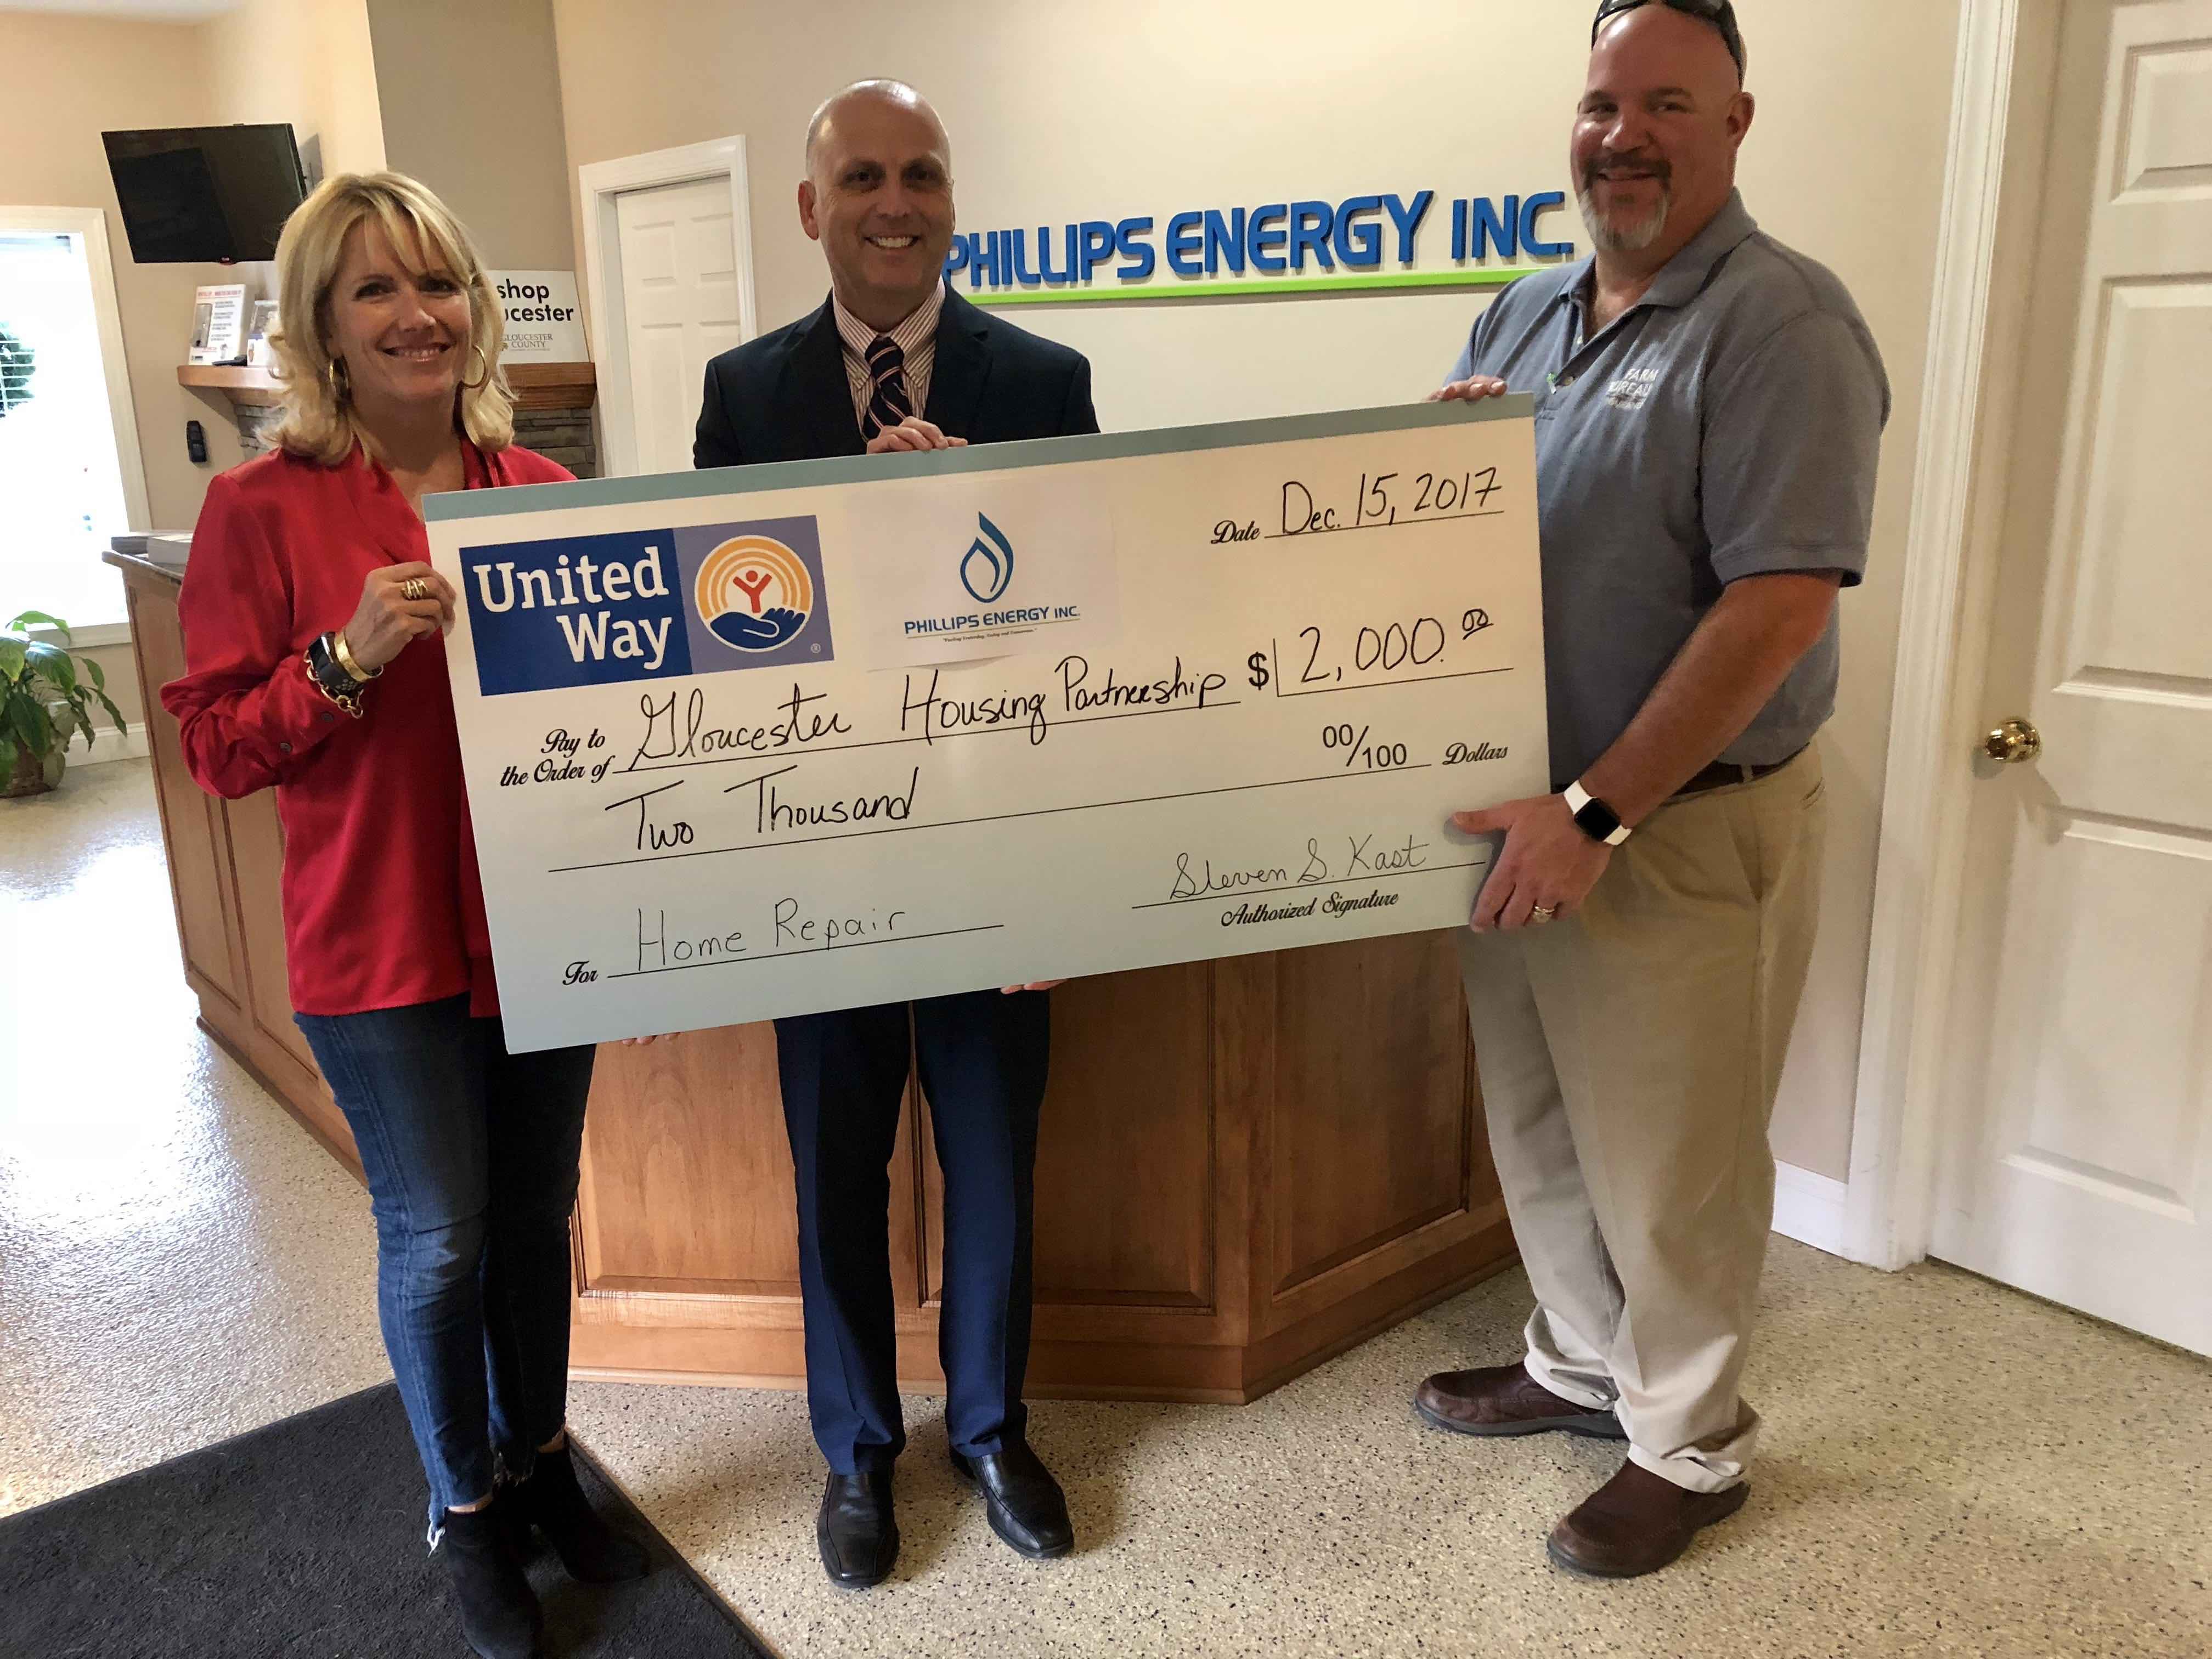 Phillips Energy and United Way Donation Check to Gloucester Housing Partnership-min2.jpg